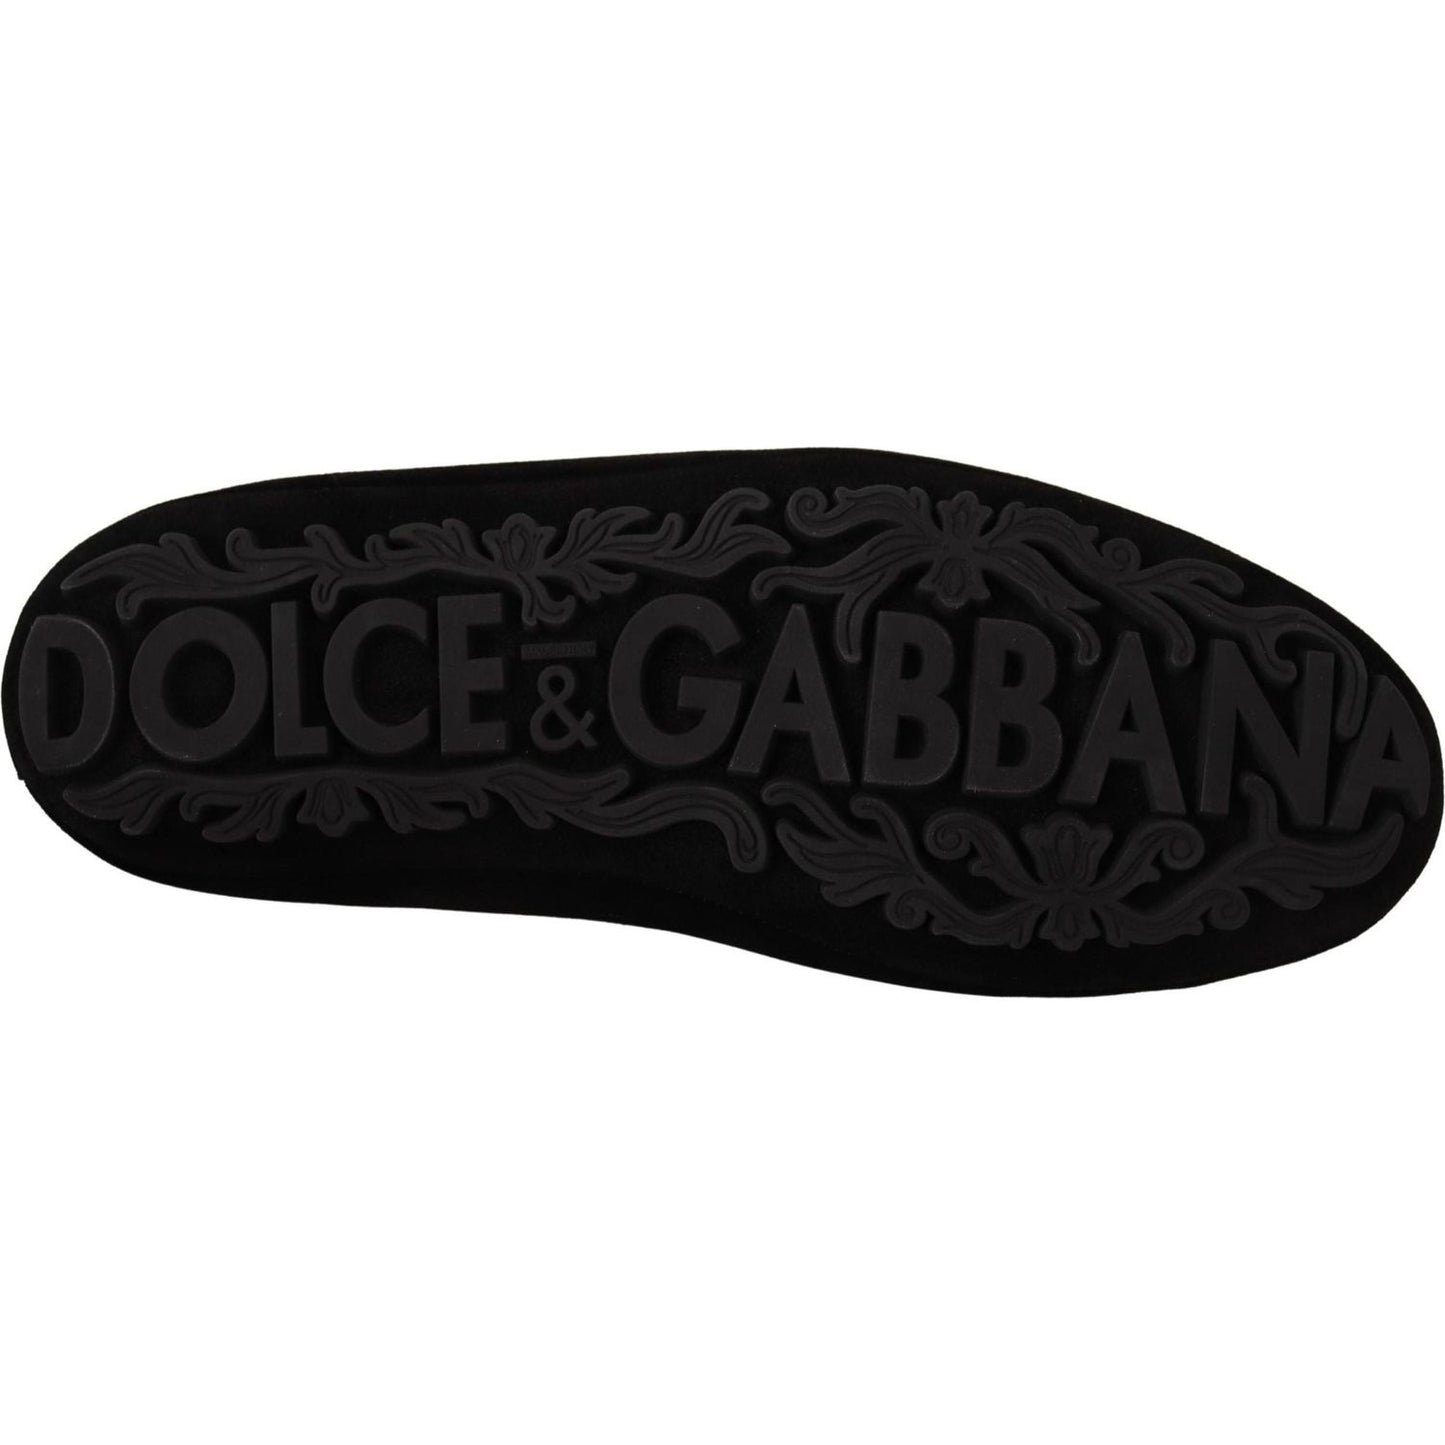 Dolce & Gabbana Elegant Black Leather Loafer Slides with Gold Embroidery black-leather-crystal-gold-crown-loafers-shoes IMG_5289-scaled-b9aae2b4-47c.jpg